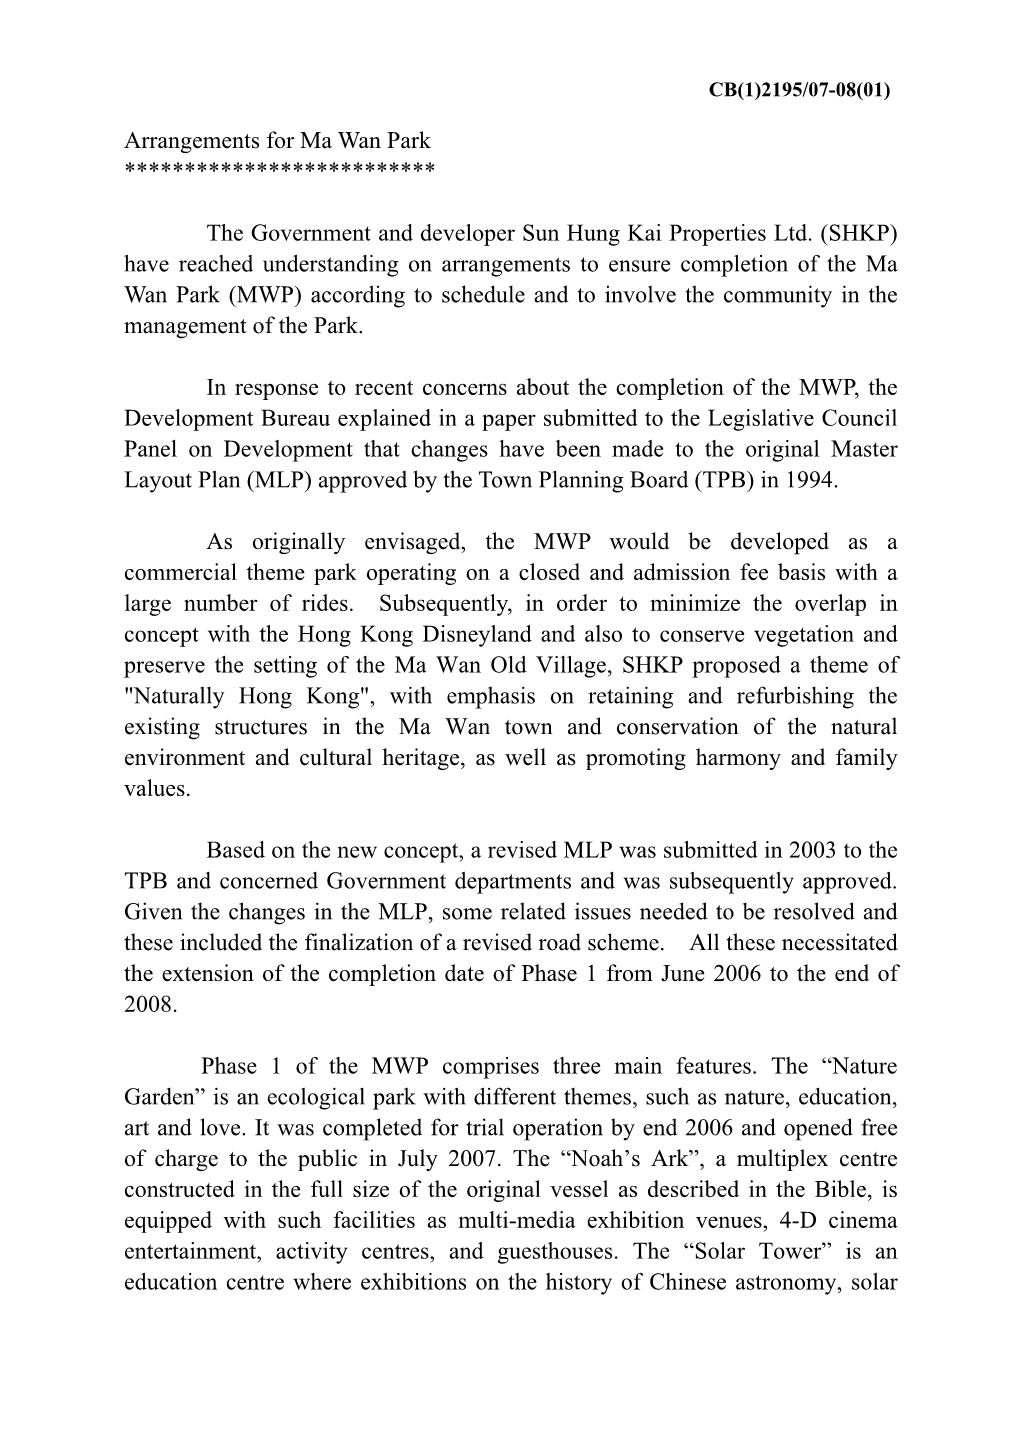 Administration's Paper on Ma Wan Park